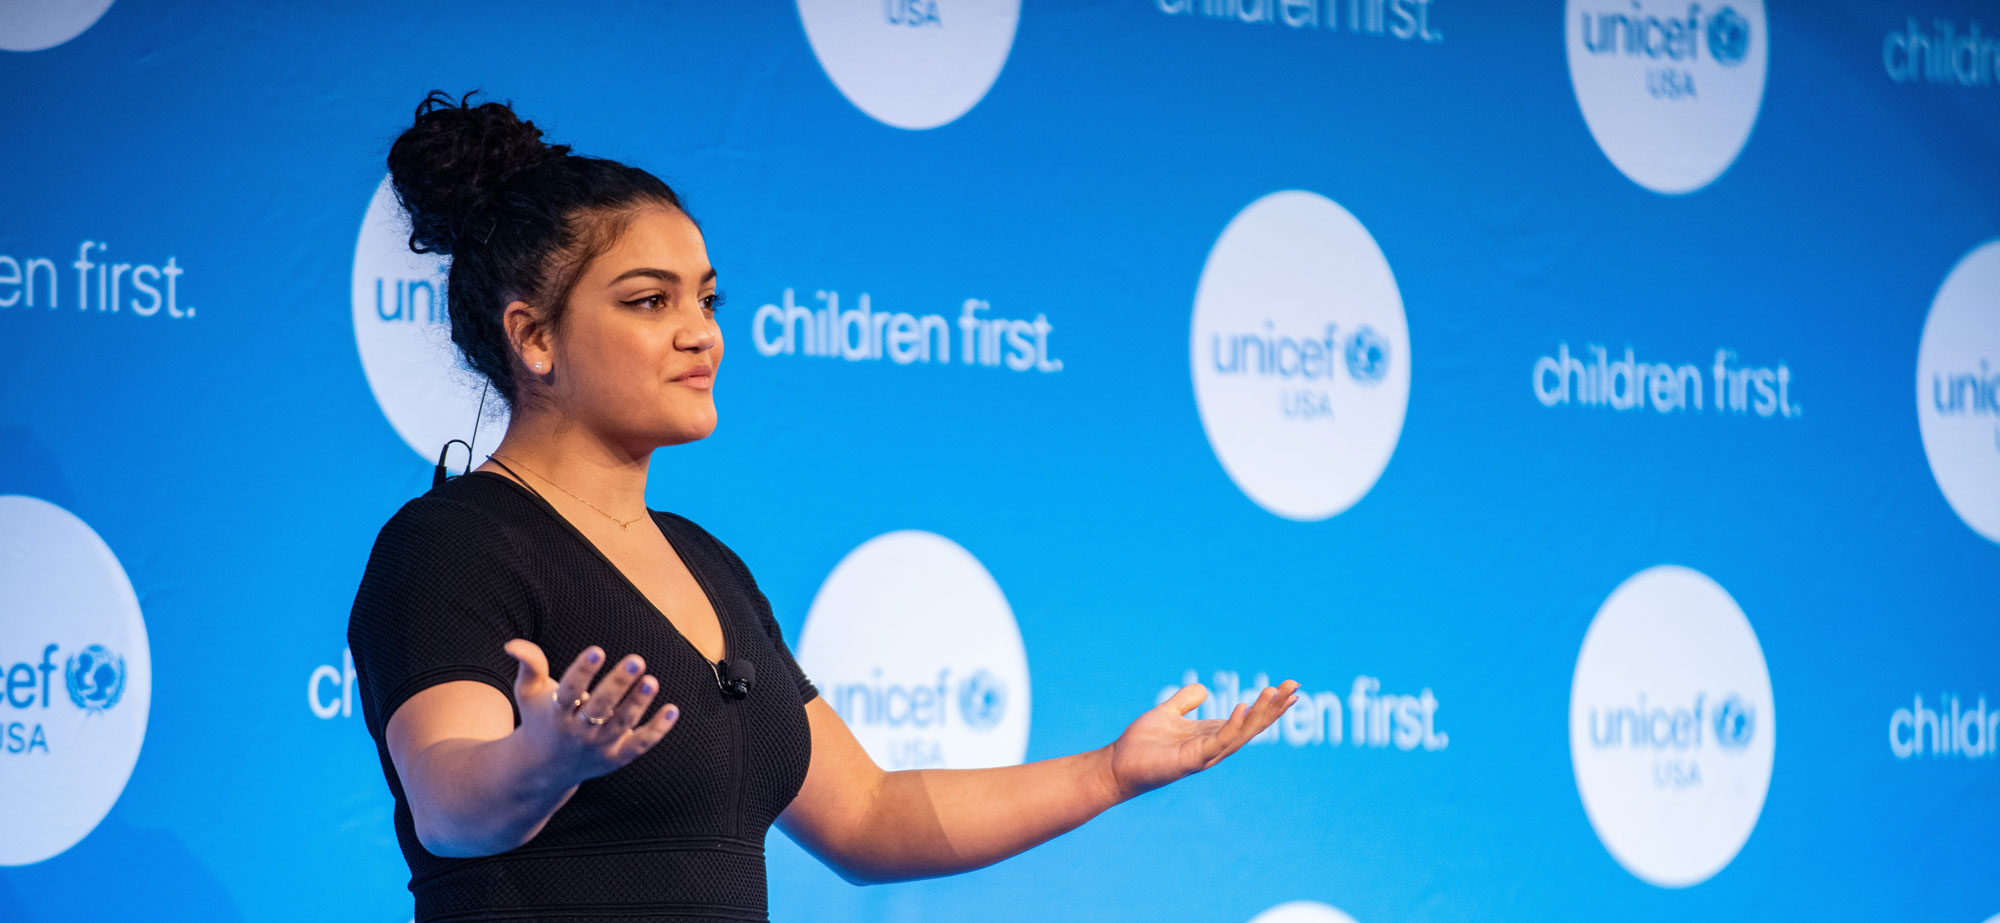 UUSA Supporter Laurie Hernandez speaking at UNICEF USA's 2019 Advocacy Day in Washington, D.C.